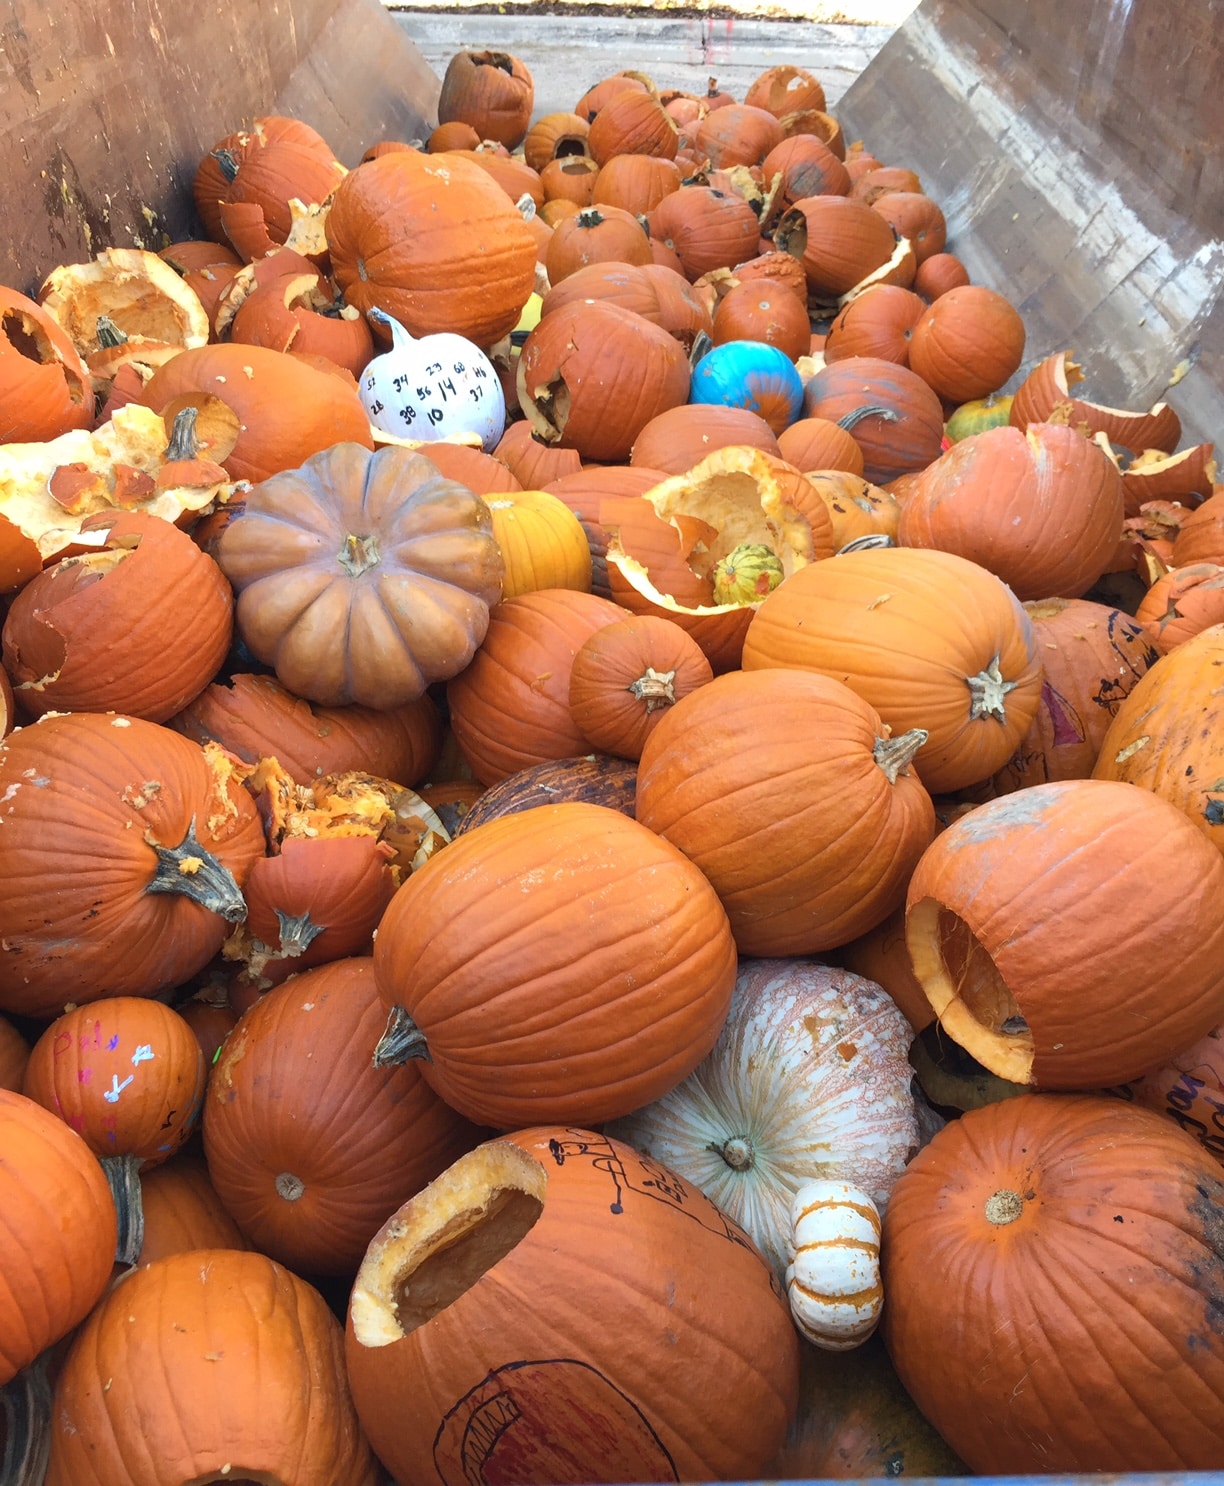 The Results are In! The 2016 Pumpkin Collection was a